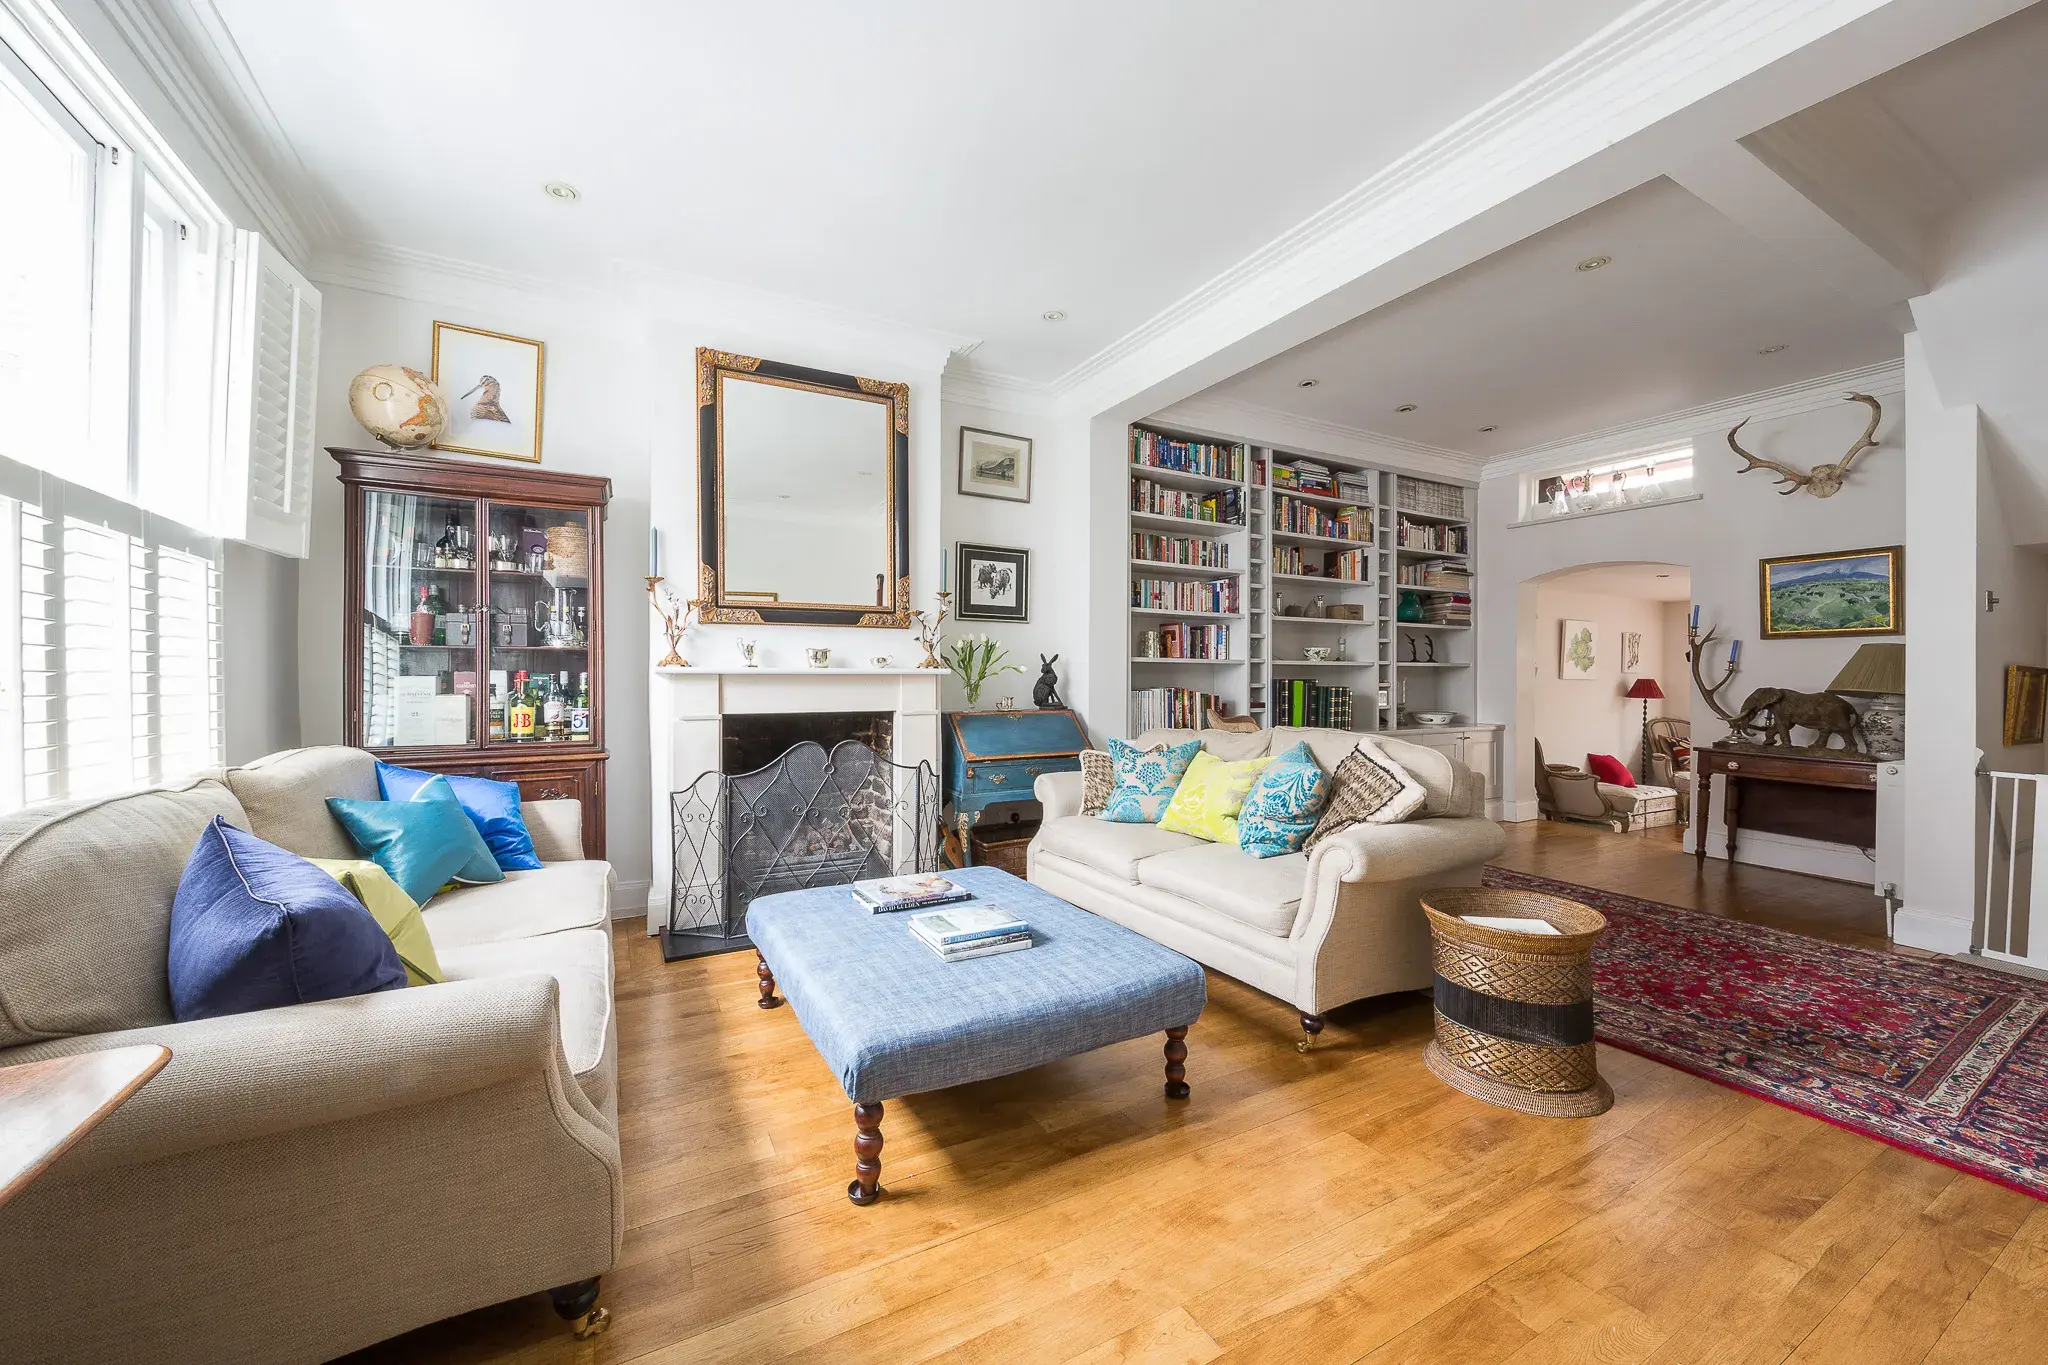 Waterford Road II, holiday home in Fulham, London